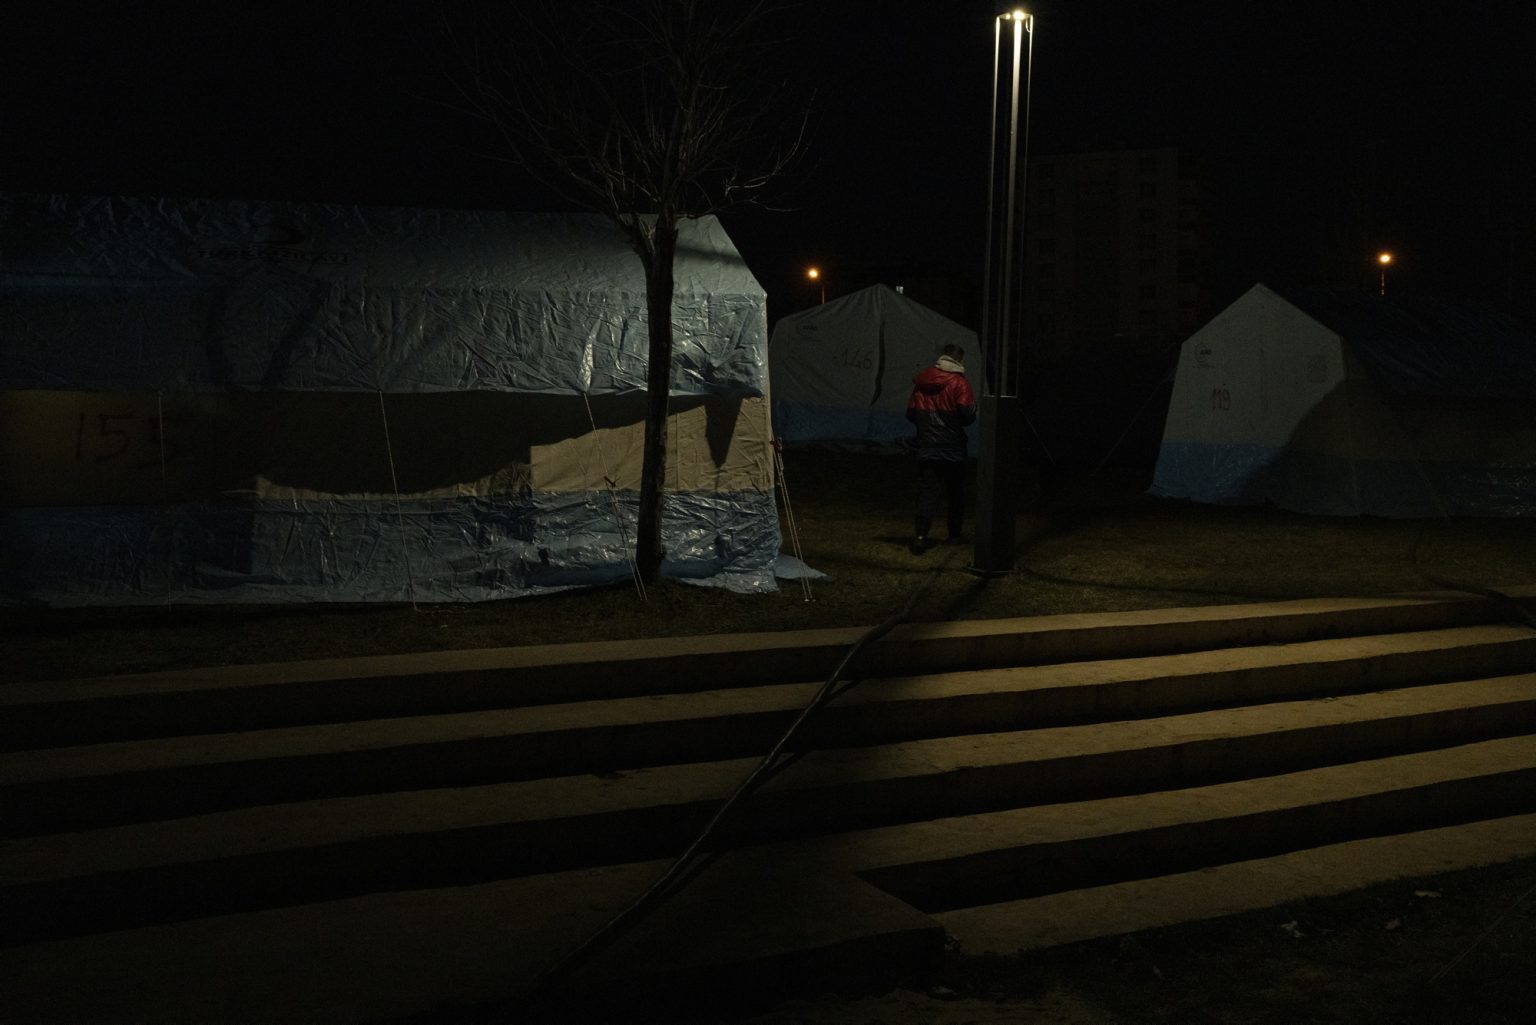 Diyarbakir, Turkey, February 2023 - The aftermath of the earthquake that hit southern Turkey and northern Syria. A man walks inside a tent camp set up in the city of Diyarbakir. ><
Diyarbakir, Turchia, febbraio 2023  Le conseguenze del terremoto che ha colpito la Turchia del Sud e la Siria del nord.